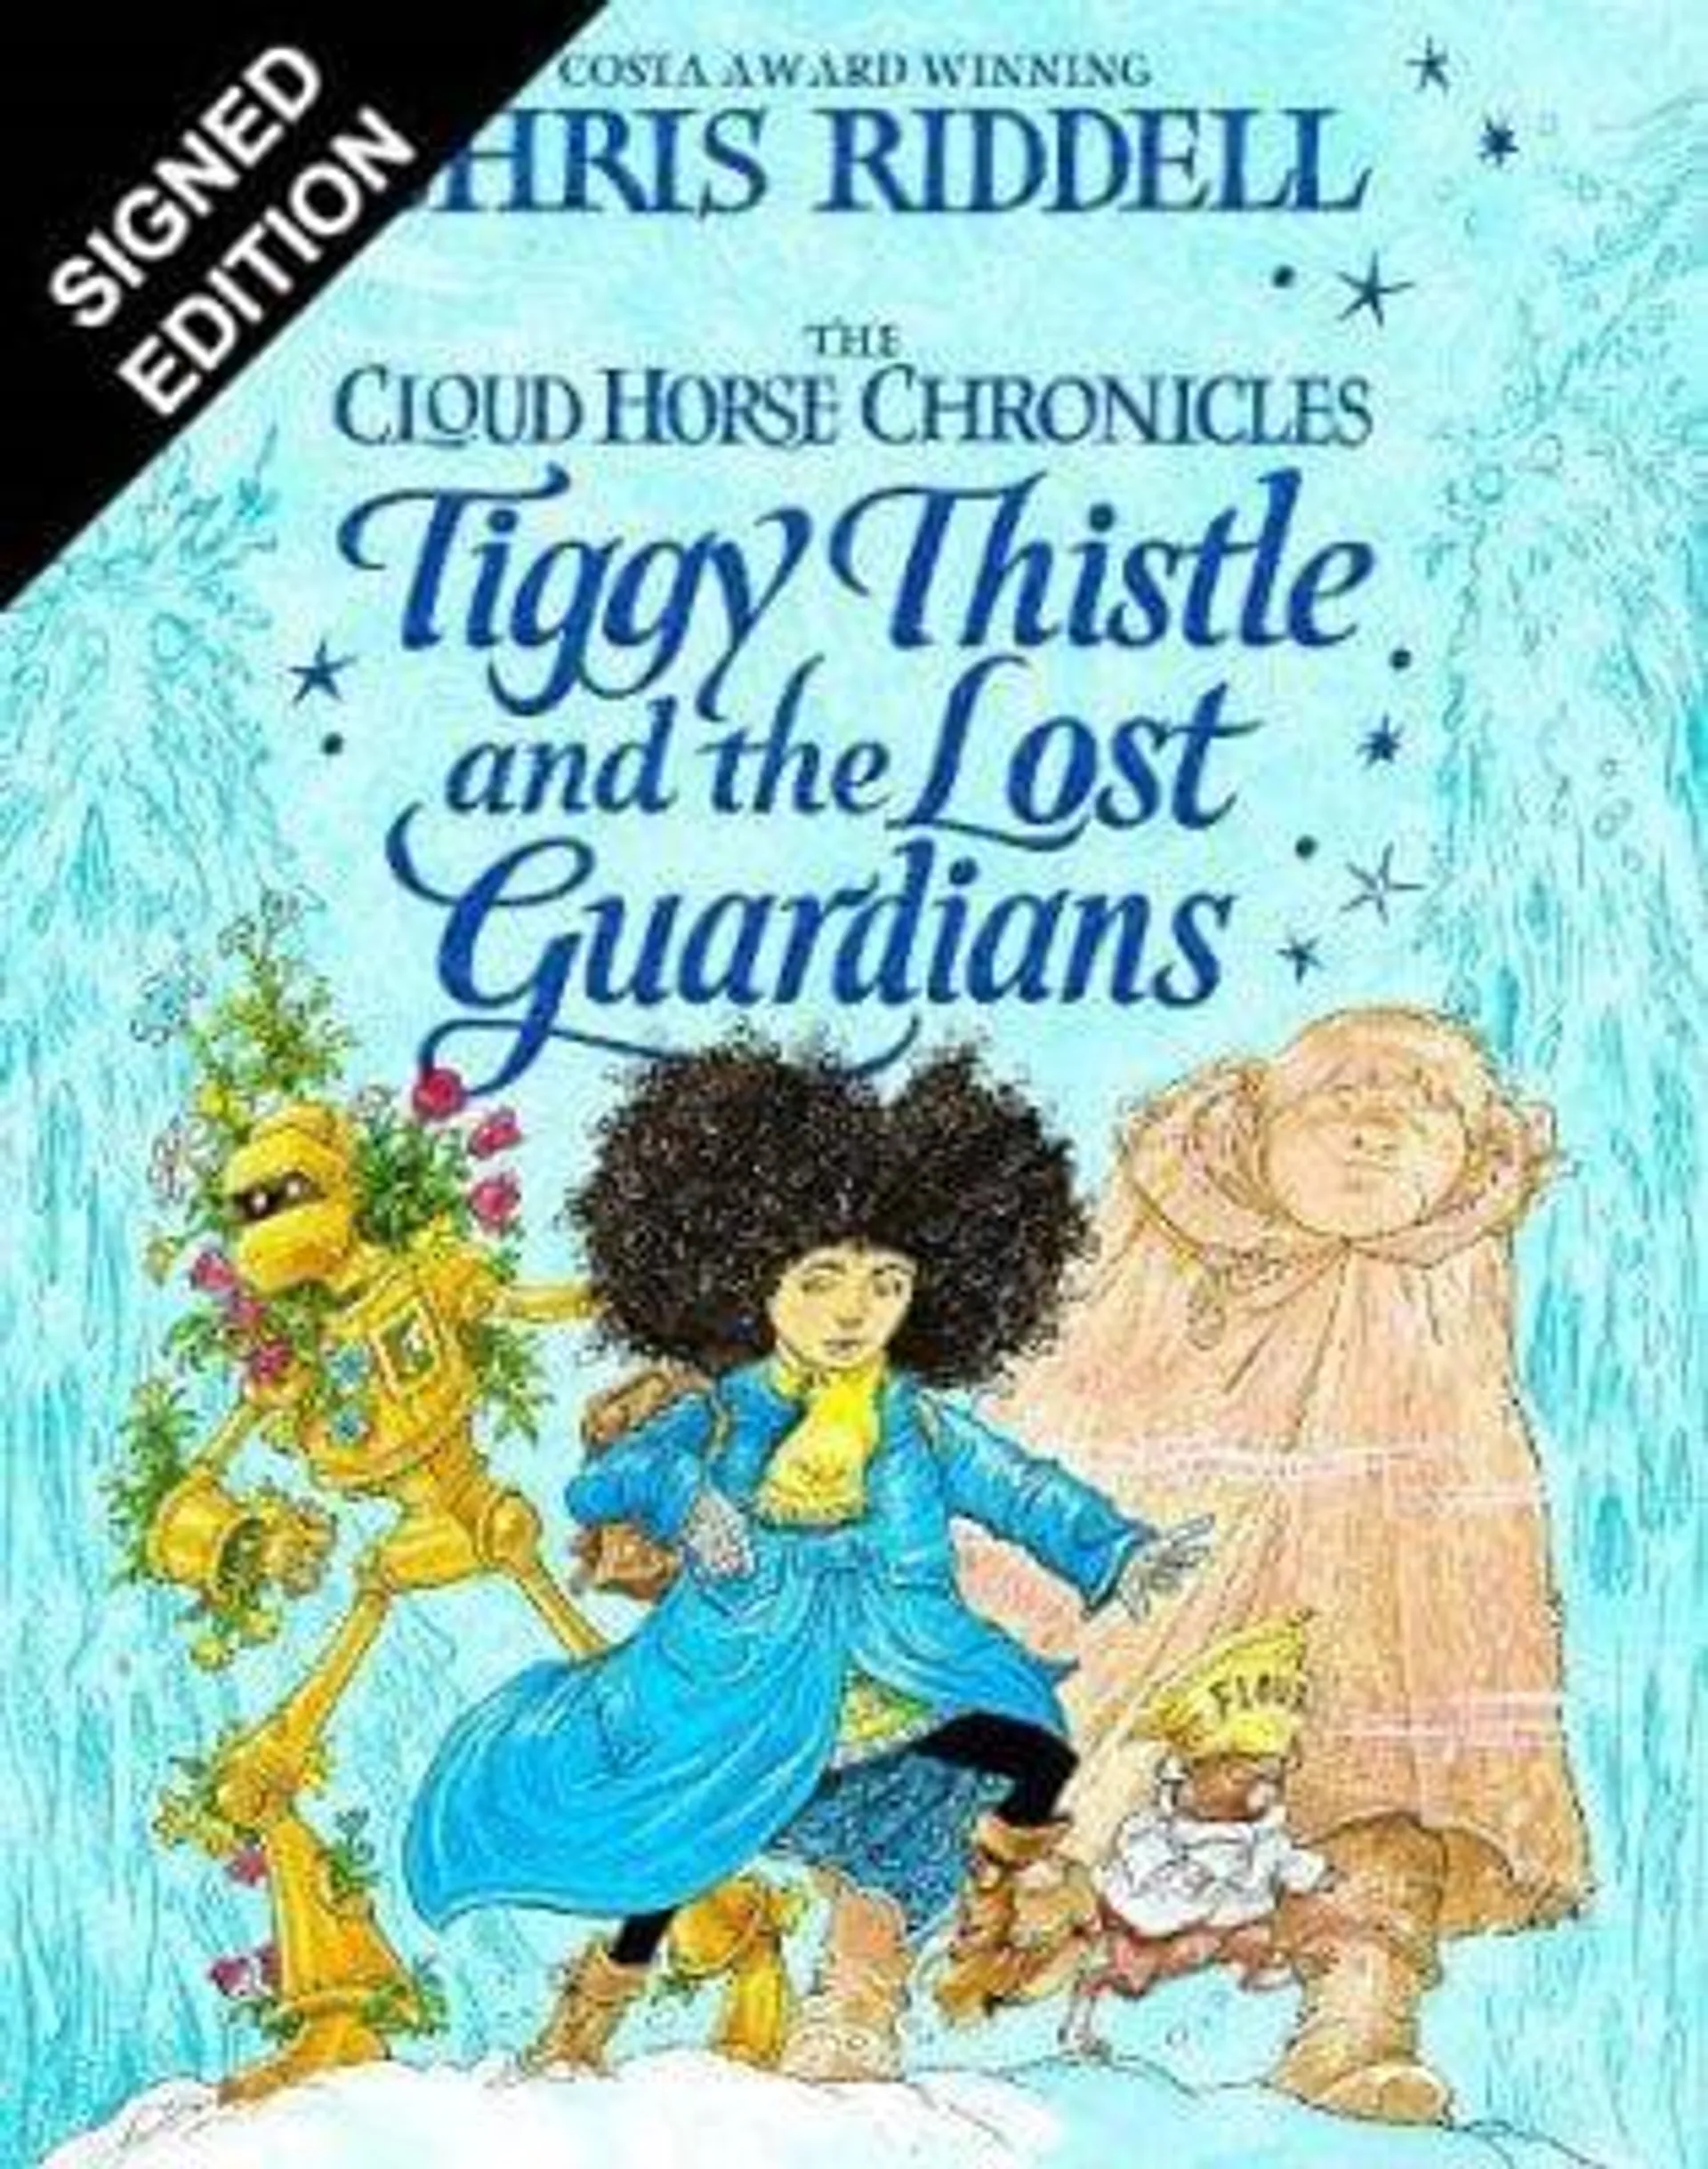 Tiggy Thistle and the Lost Guardians: Signed Bookplate Edition - The Cloud Horse Chronicles (Hardback)